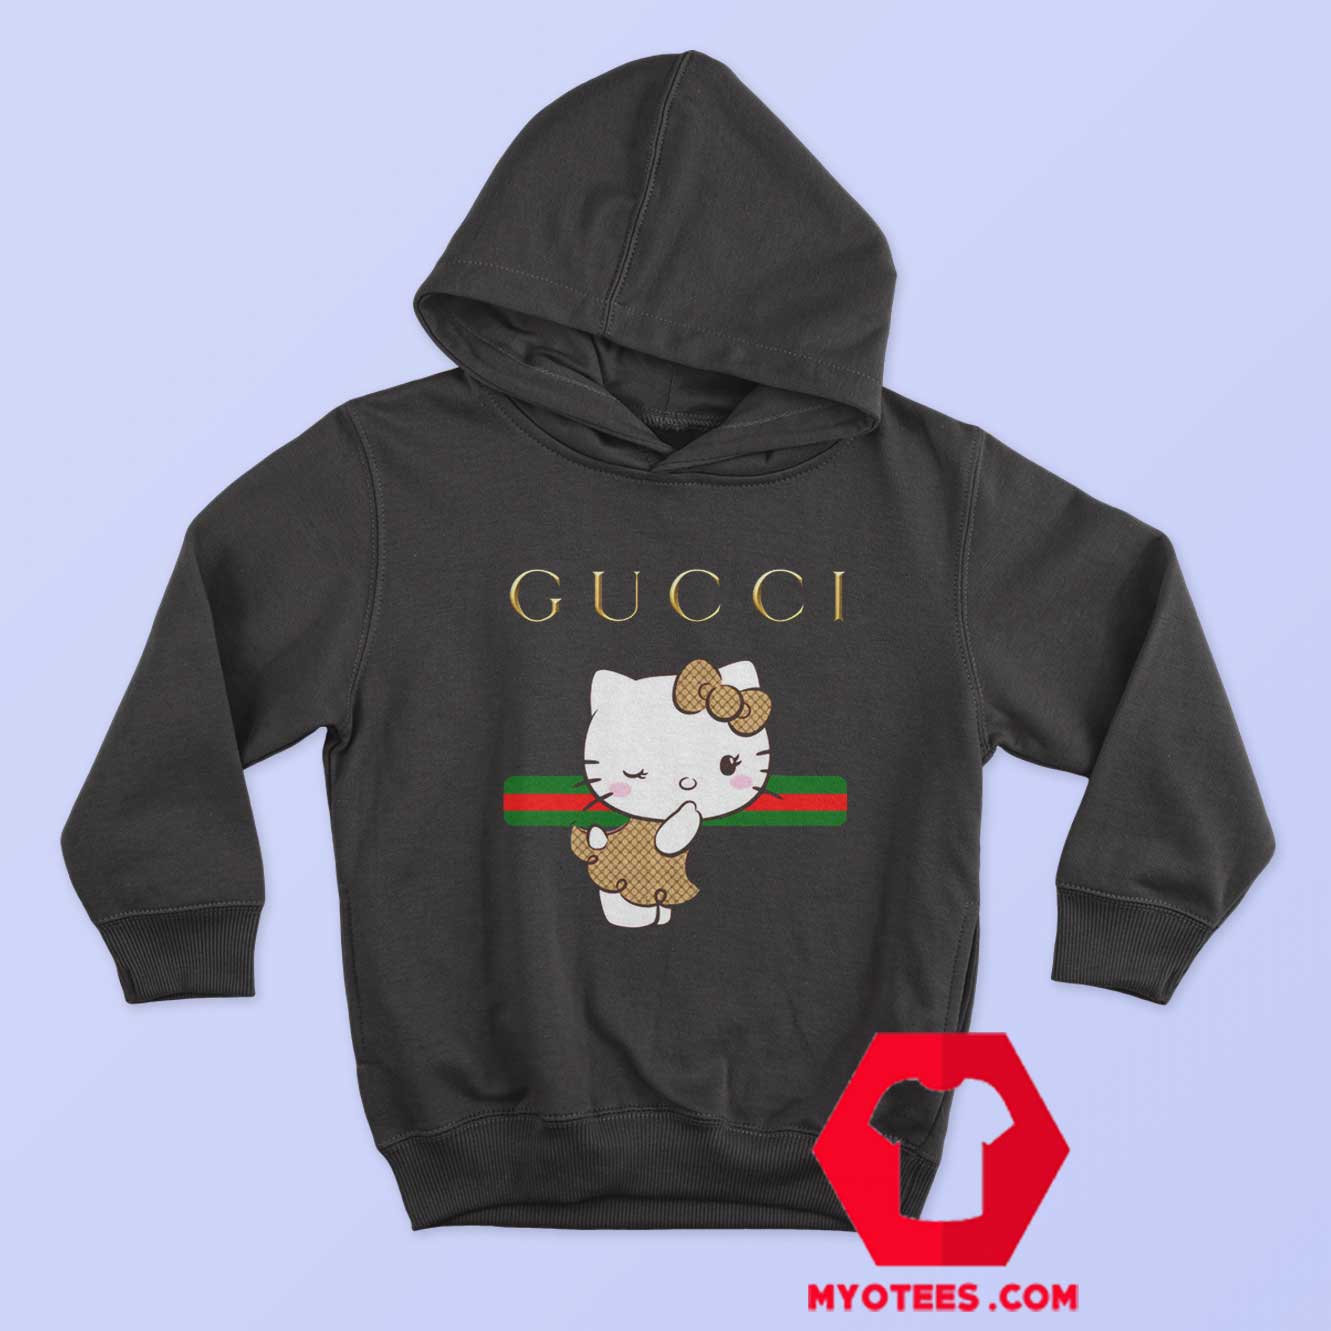 GUCCI - Hello kitty Lovers